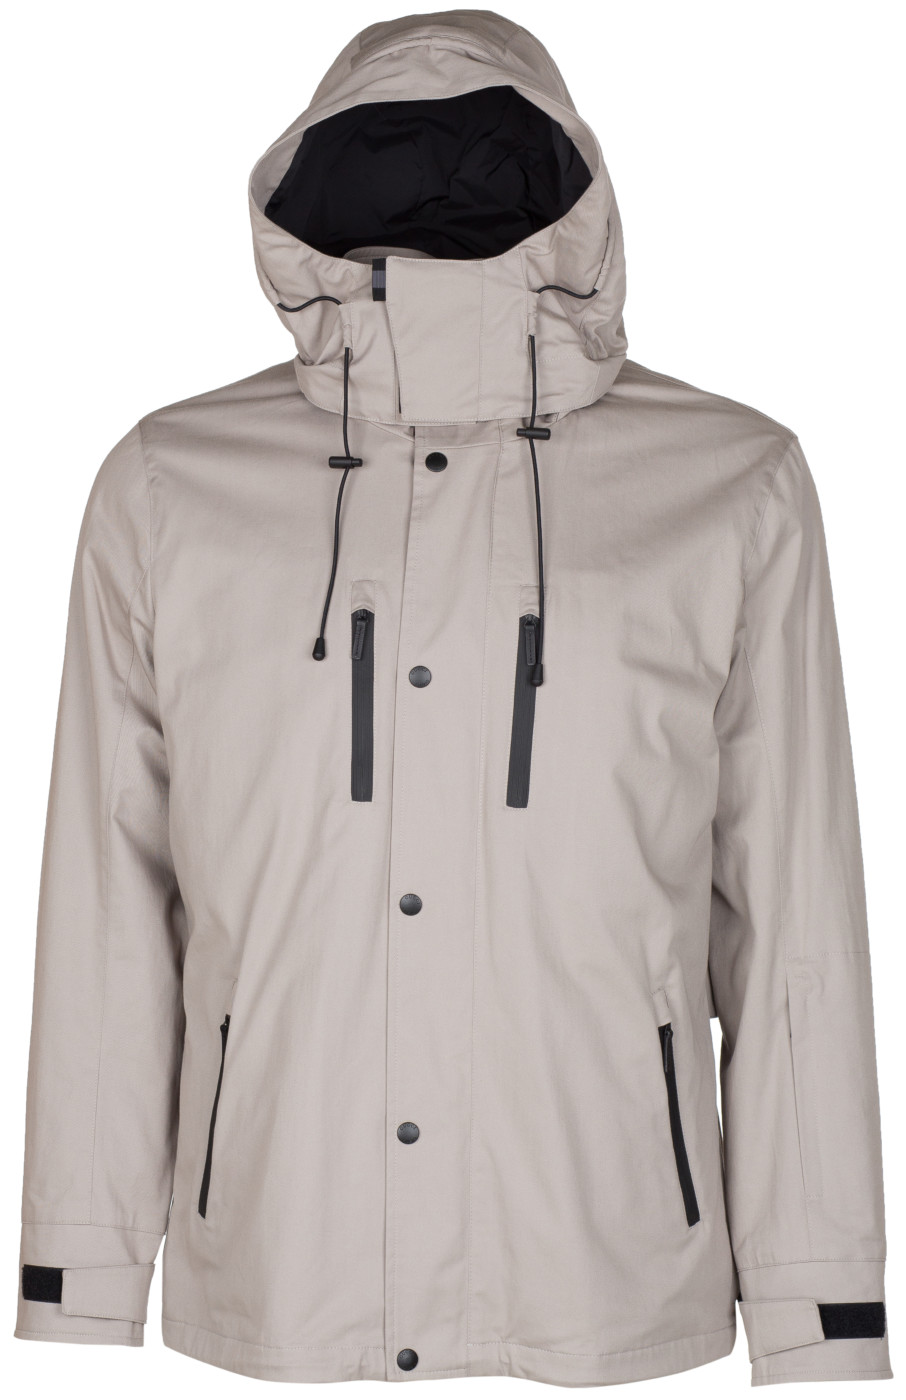 woocommerce-673321-2209615.cloudwaysapps.com-gucci-viaggio-collection-mens-beige-techno-cotton-twill-hooded-winter-snow-jacket